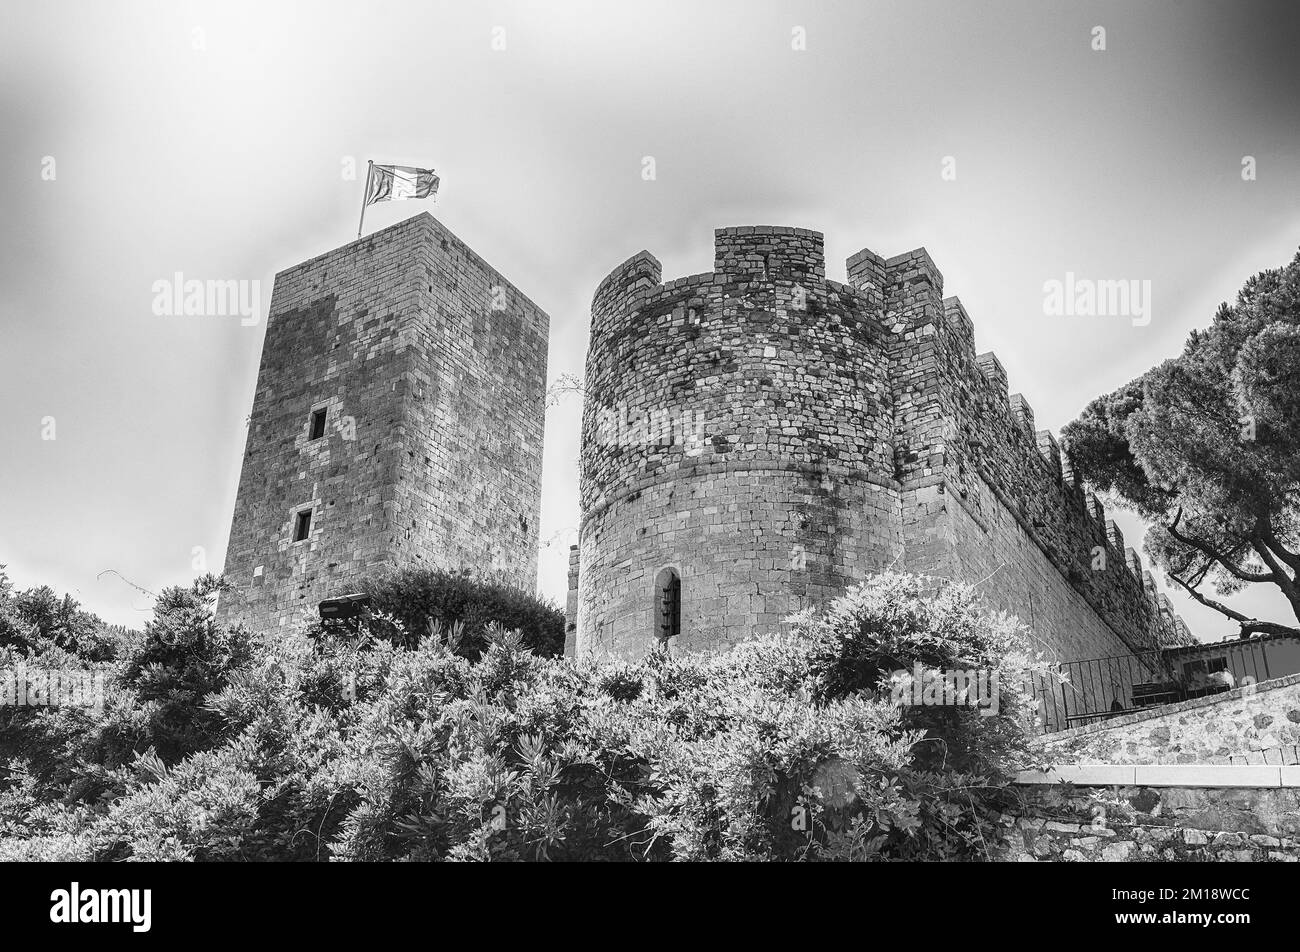 Fortification of the Castle, one of the major landmarks in Le Suquet medieval district in Cannes, Cote d'Azur, France Stock Photo